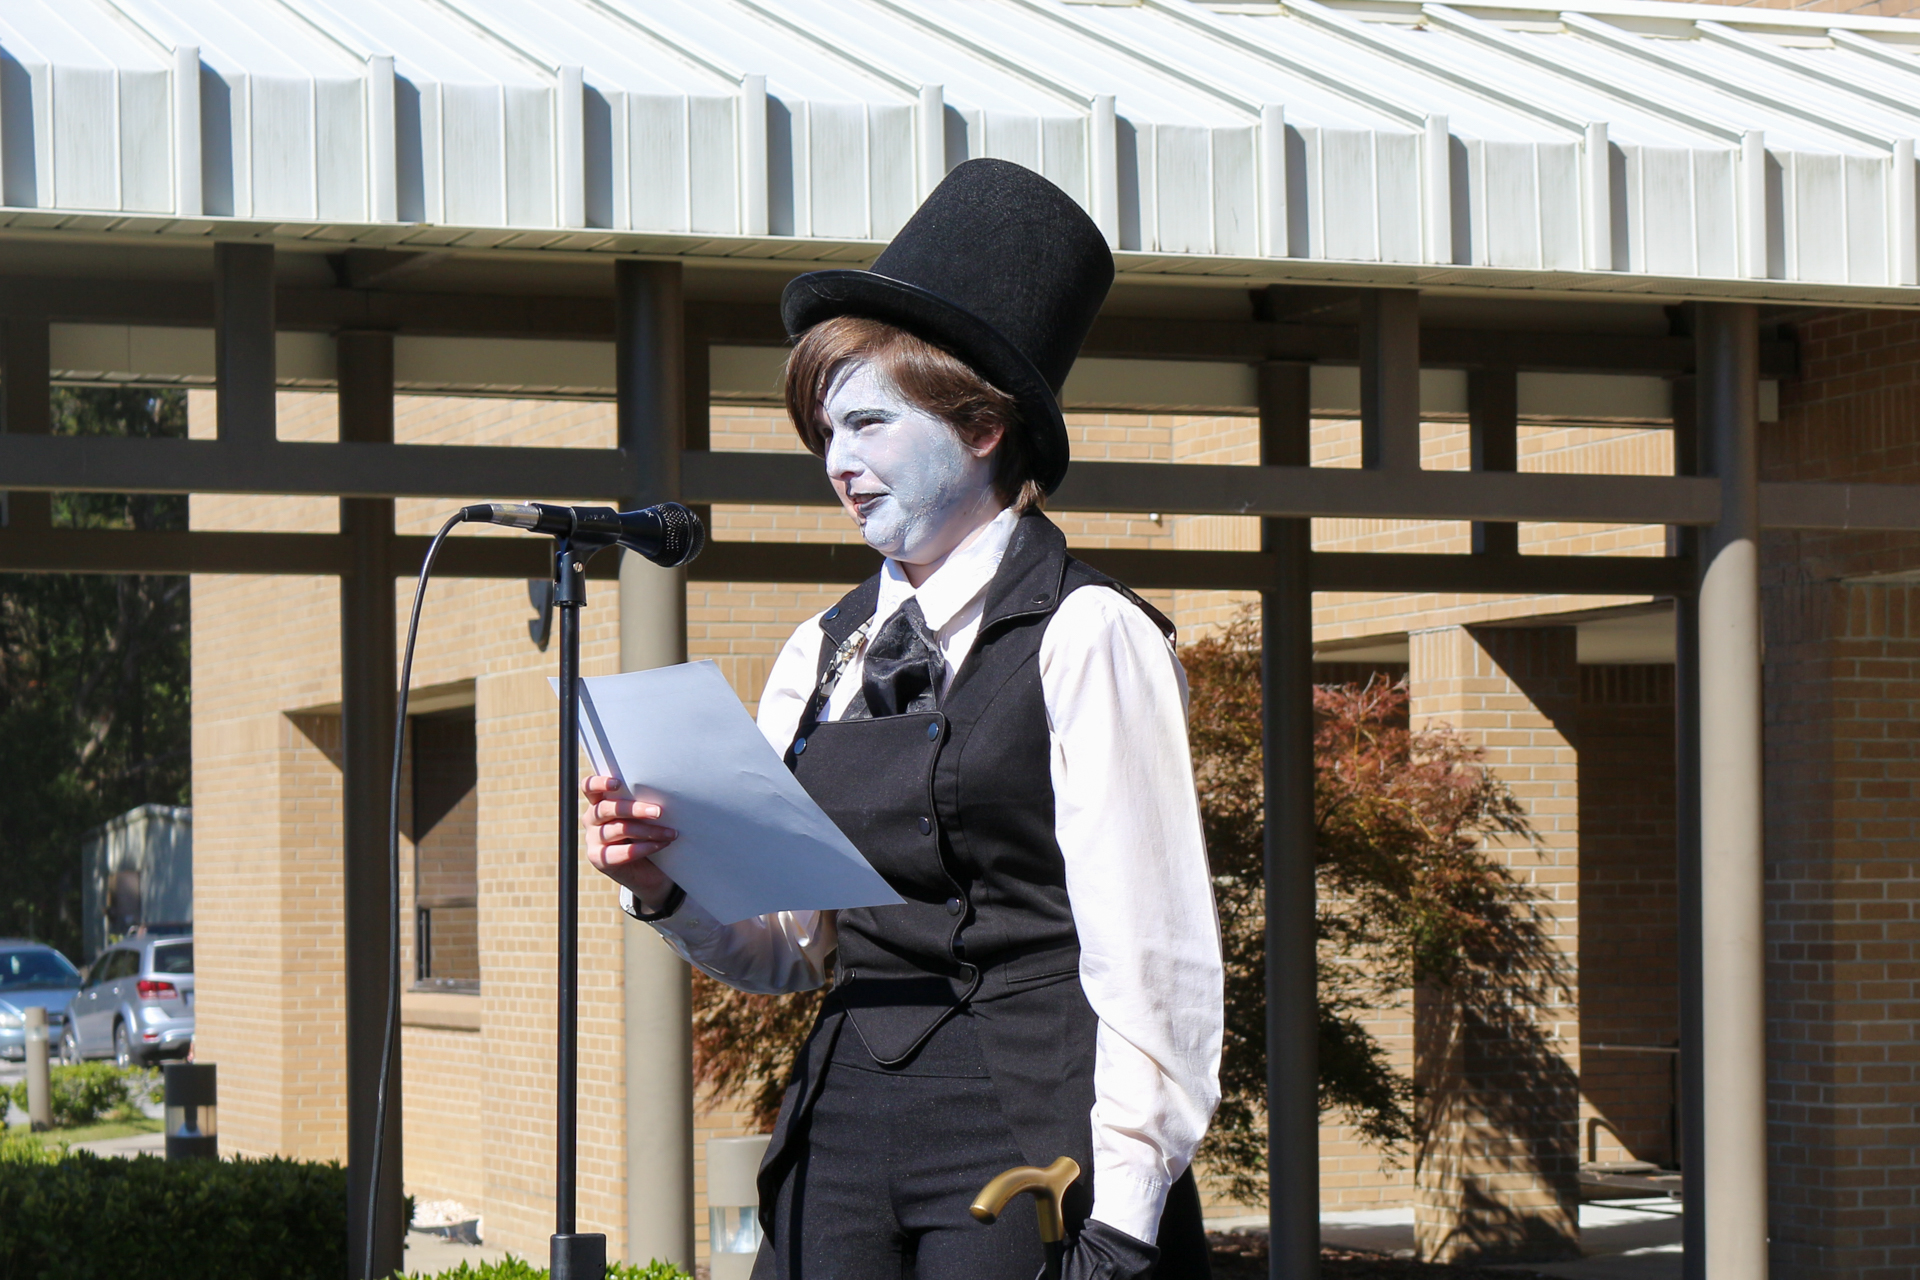 a person in costume at a microphone